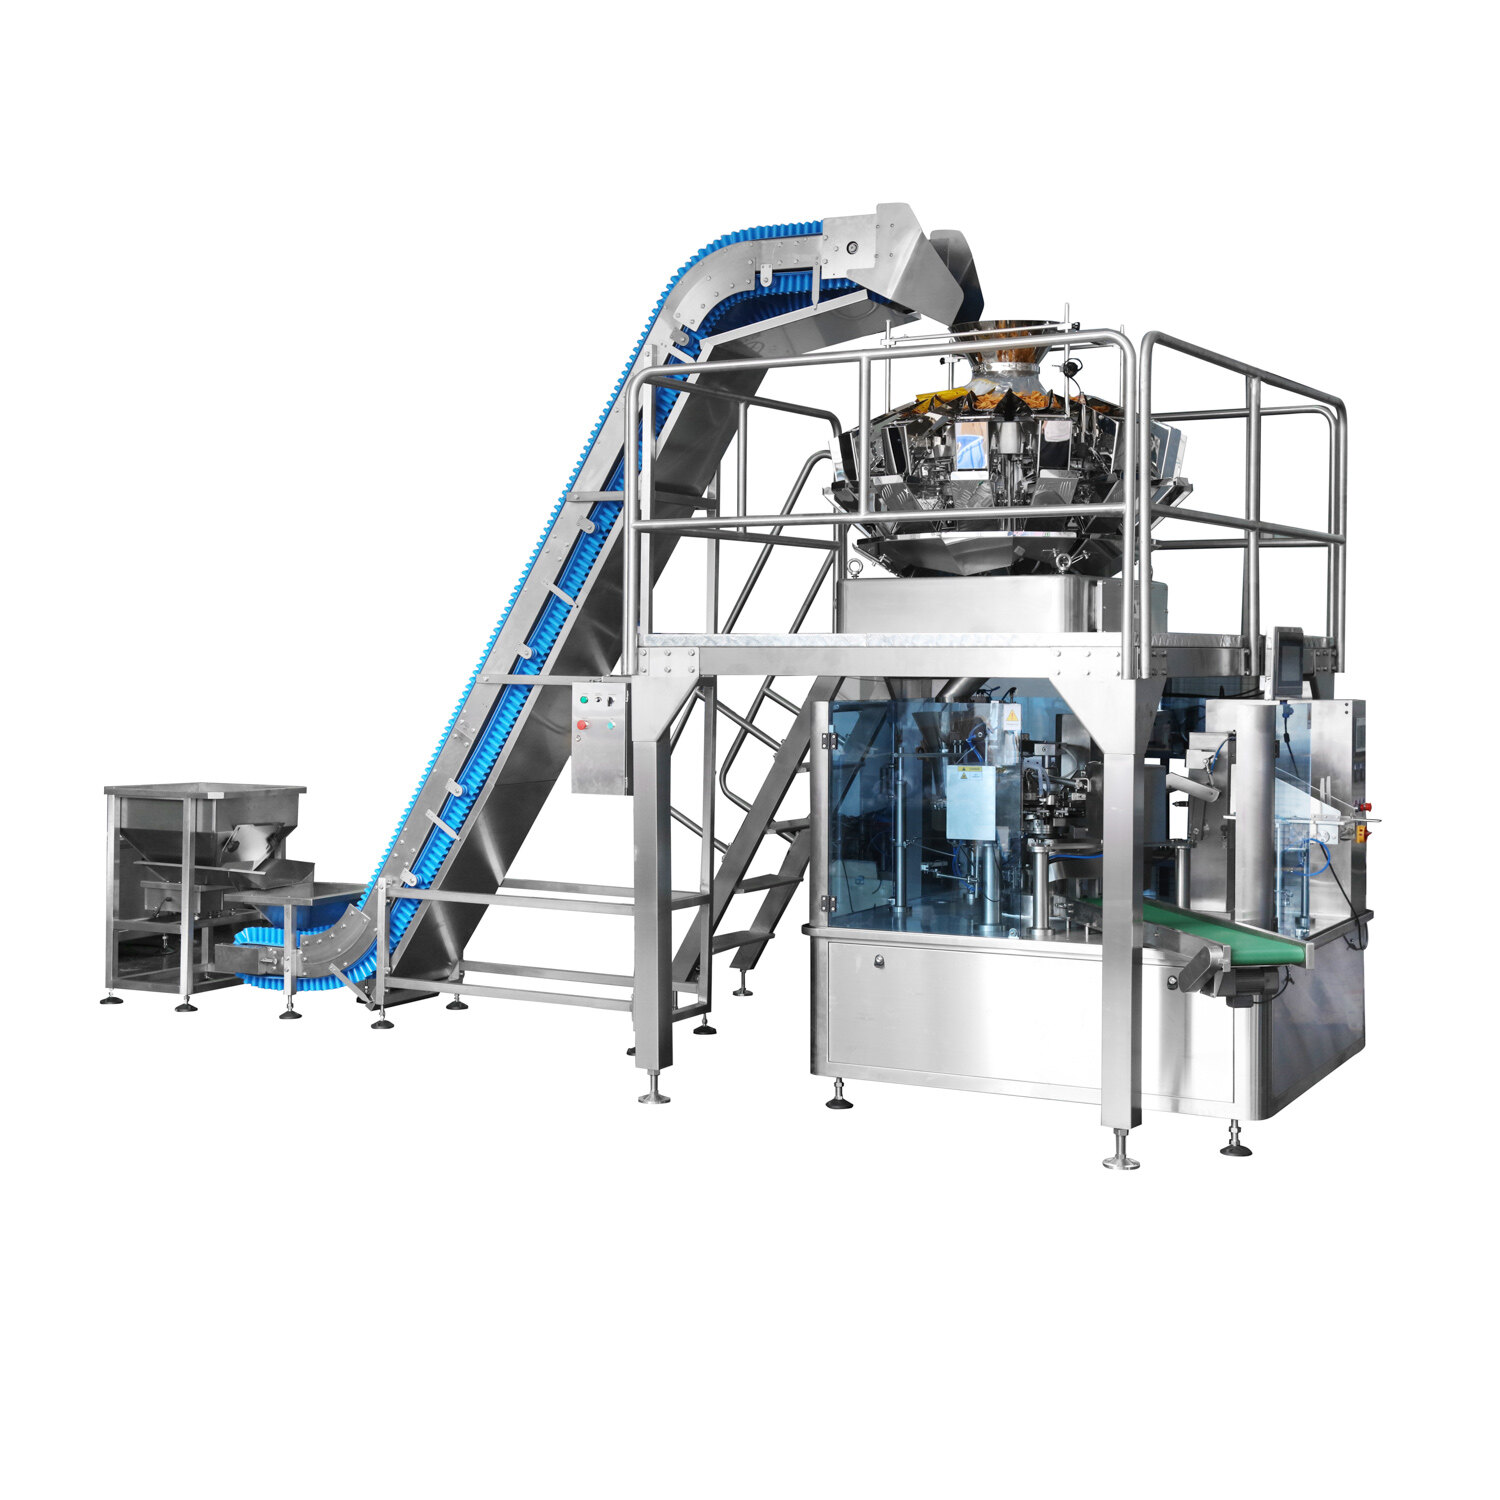 WP-BF series premade pouch rotary packing machine